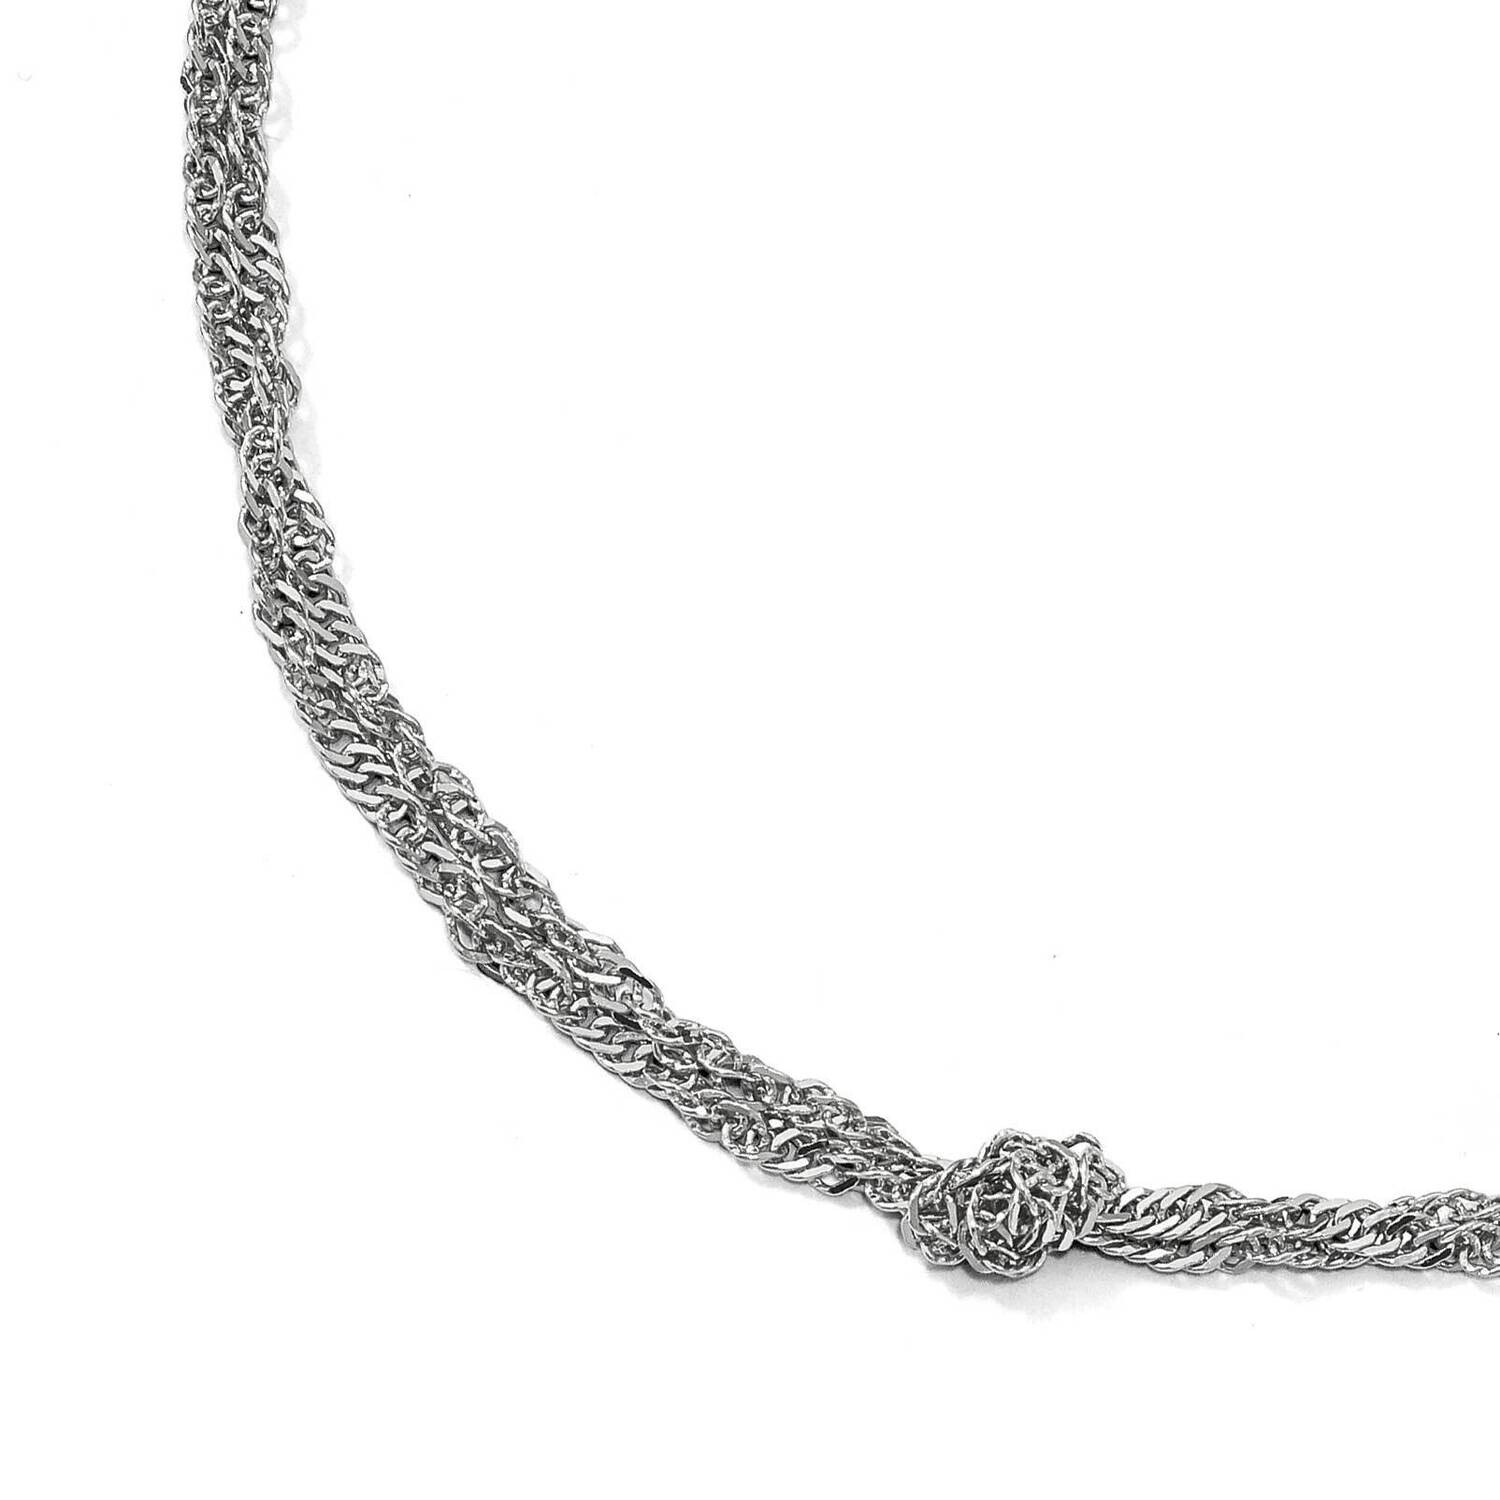 Polish Diamond-Cut Double Twisted 1.5 Inch Extension Necklace Sterling Silver QLF845-36